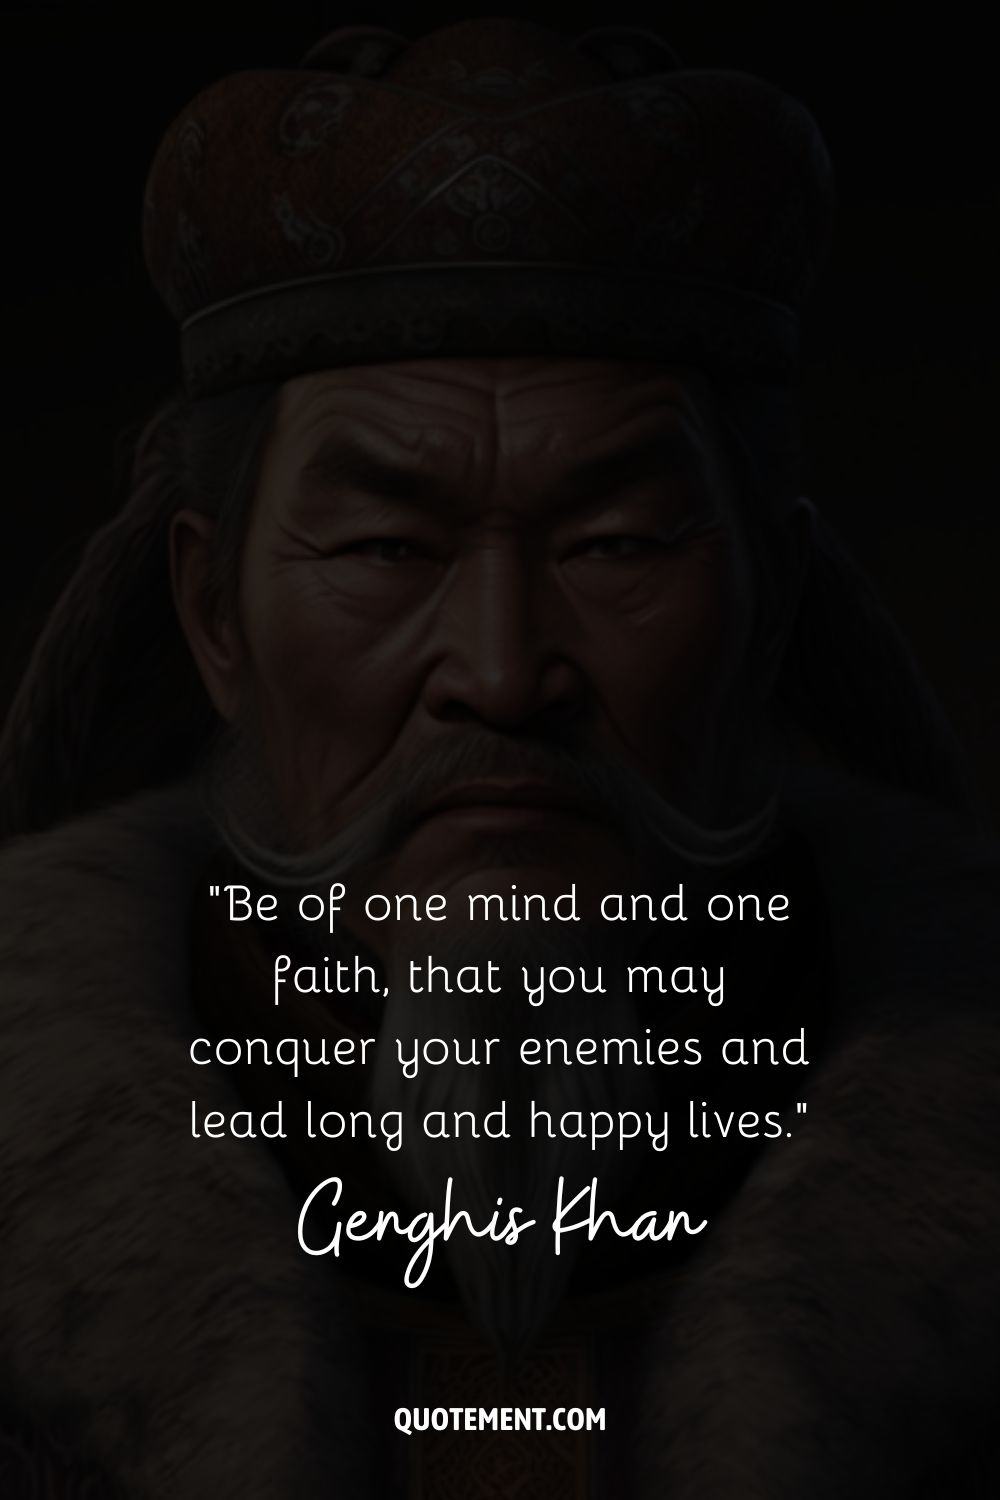 Be of one mind and one faith, that you may conquer your enemies and lead long and happy lives